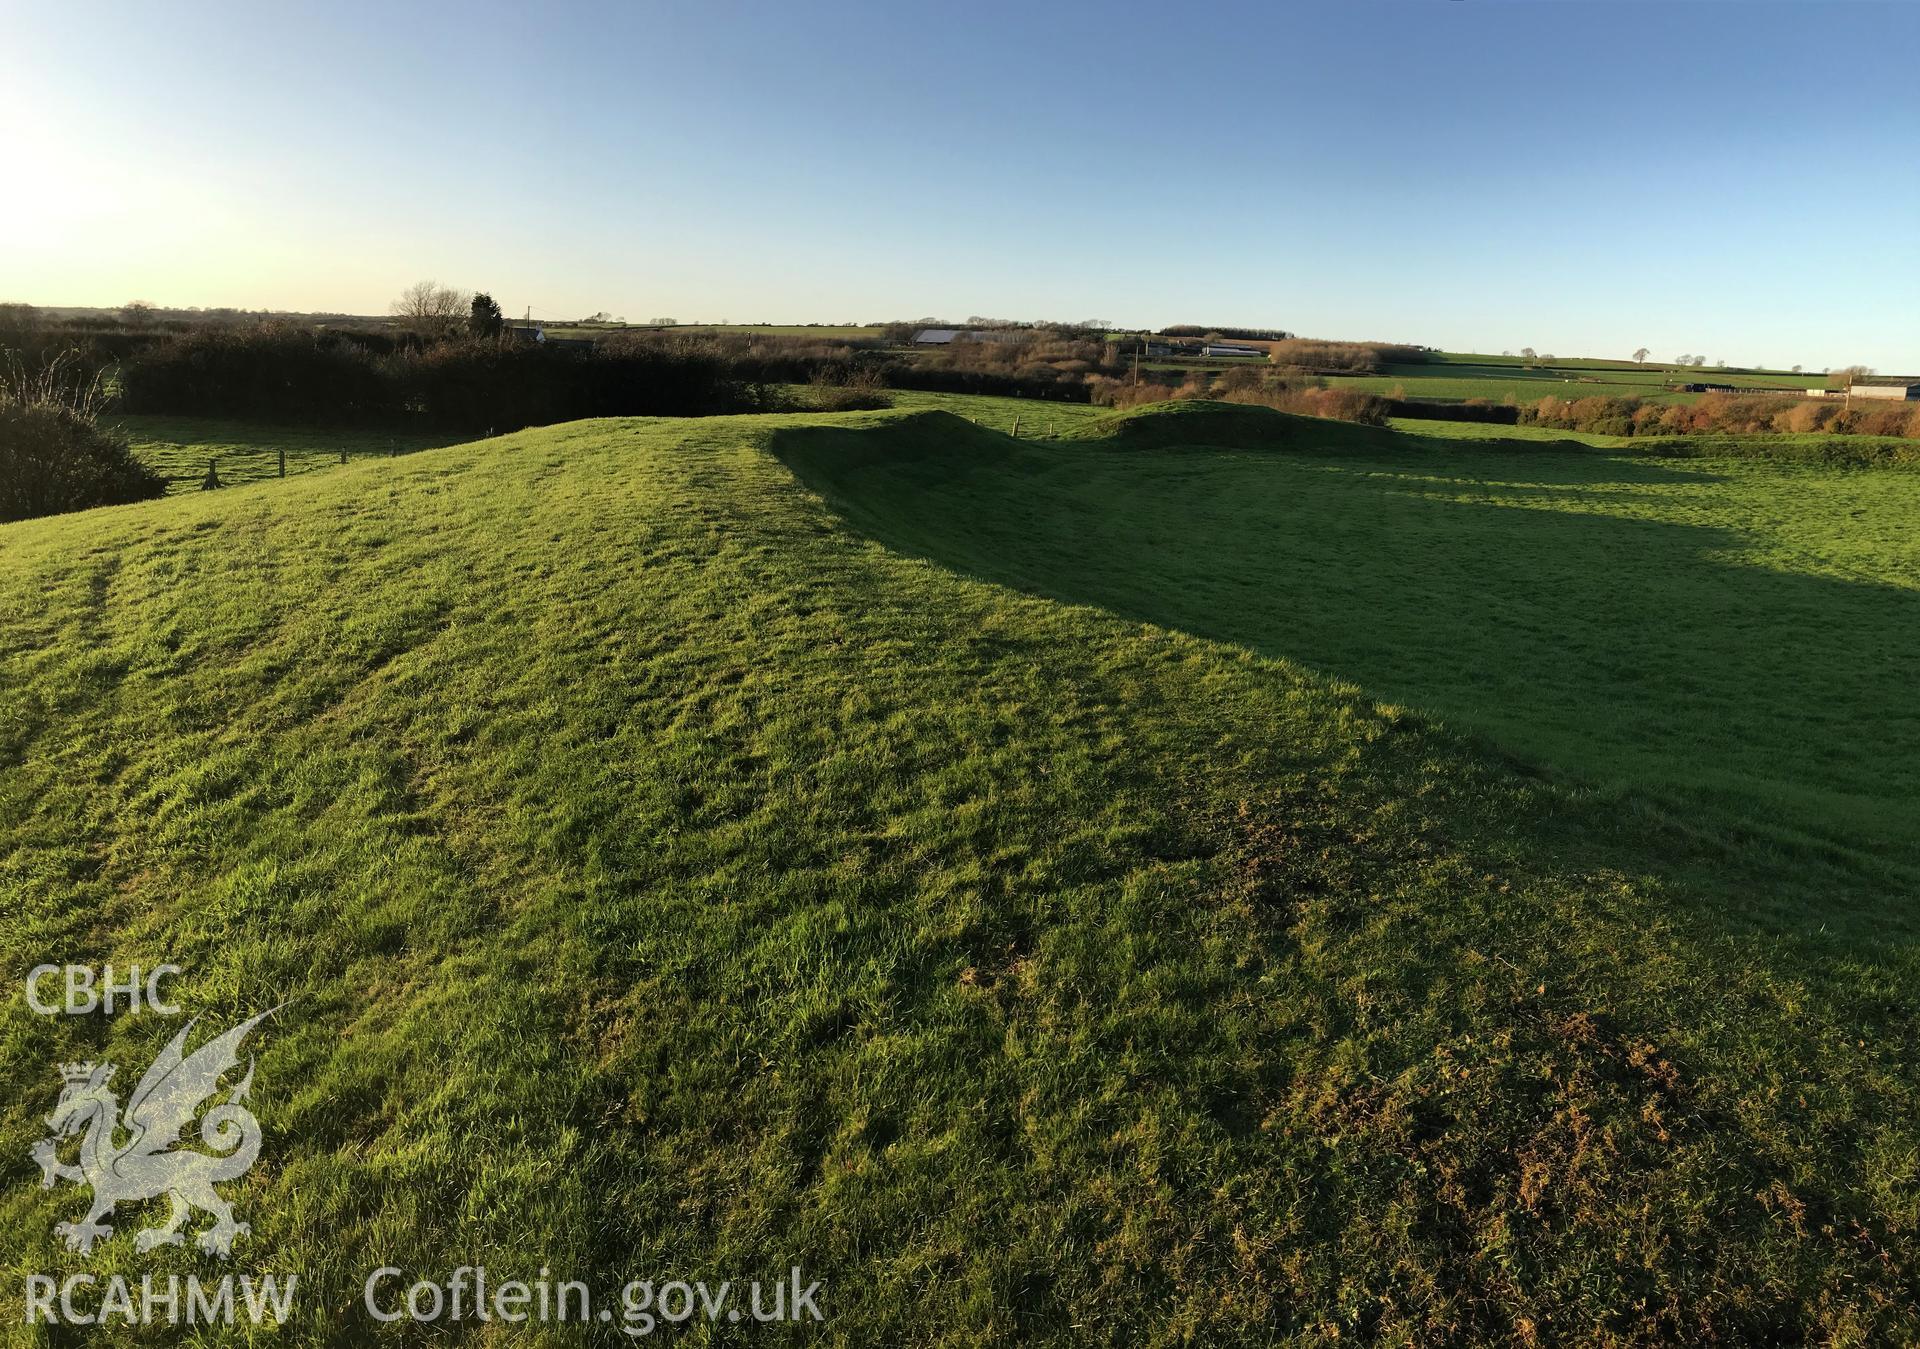 Digital colour photograph showing Castell Bryn Gwyn neolithic henge and later ringwork, Llanidan, taken by Paul Davis on 3rd December 2019.